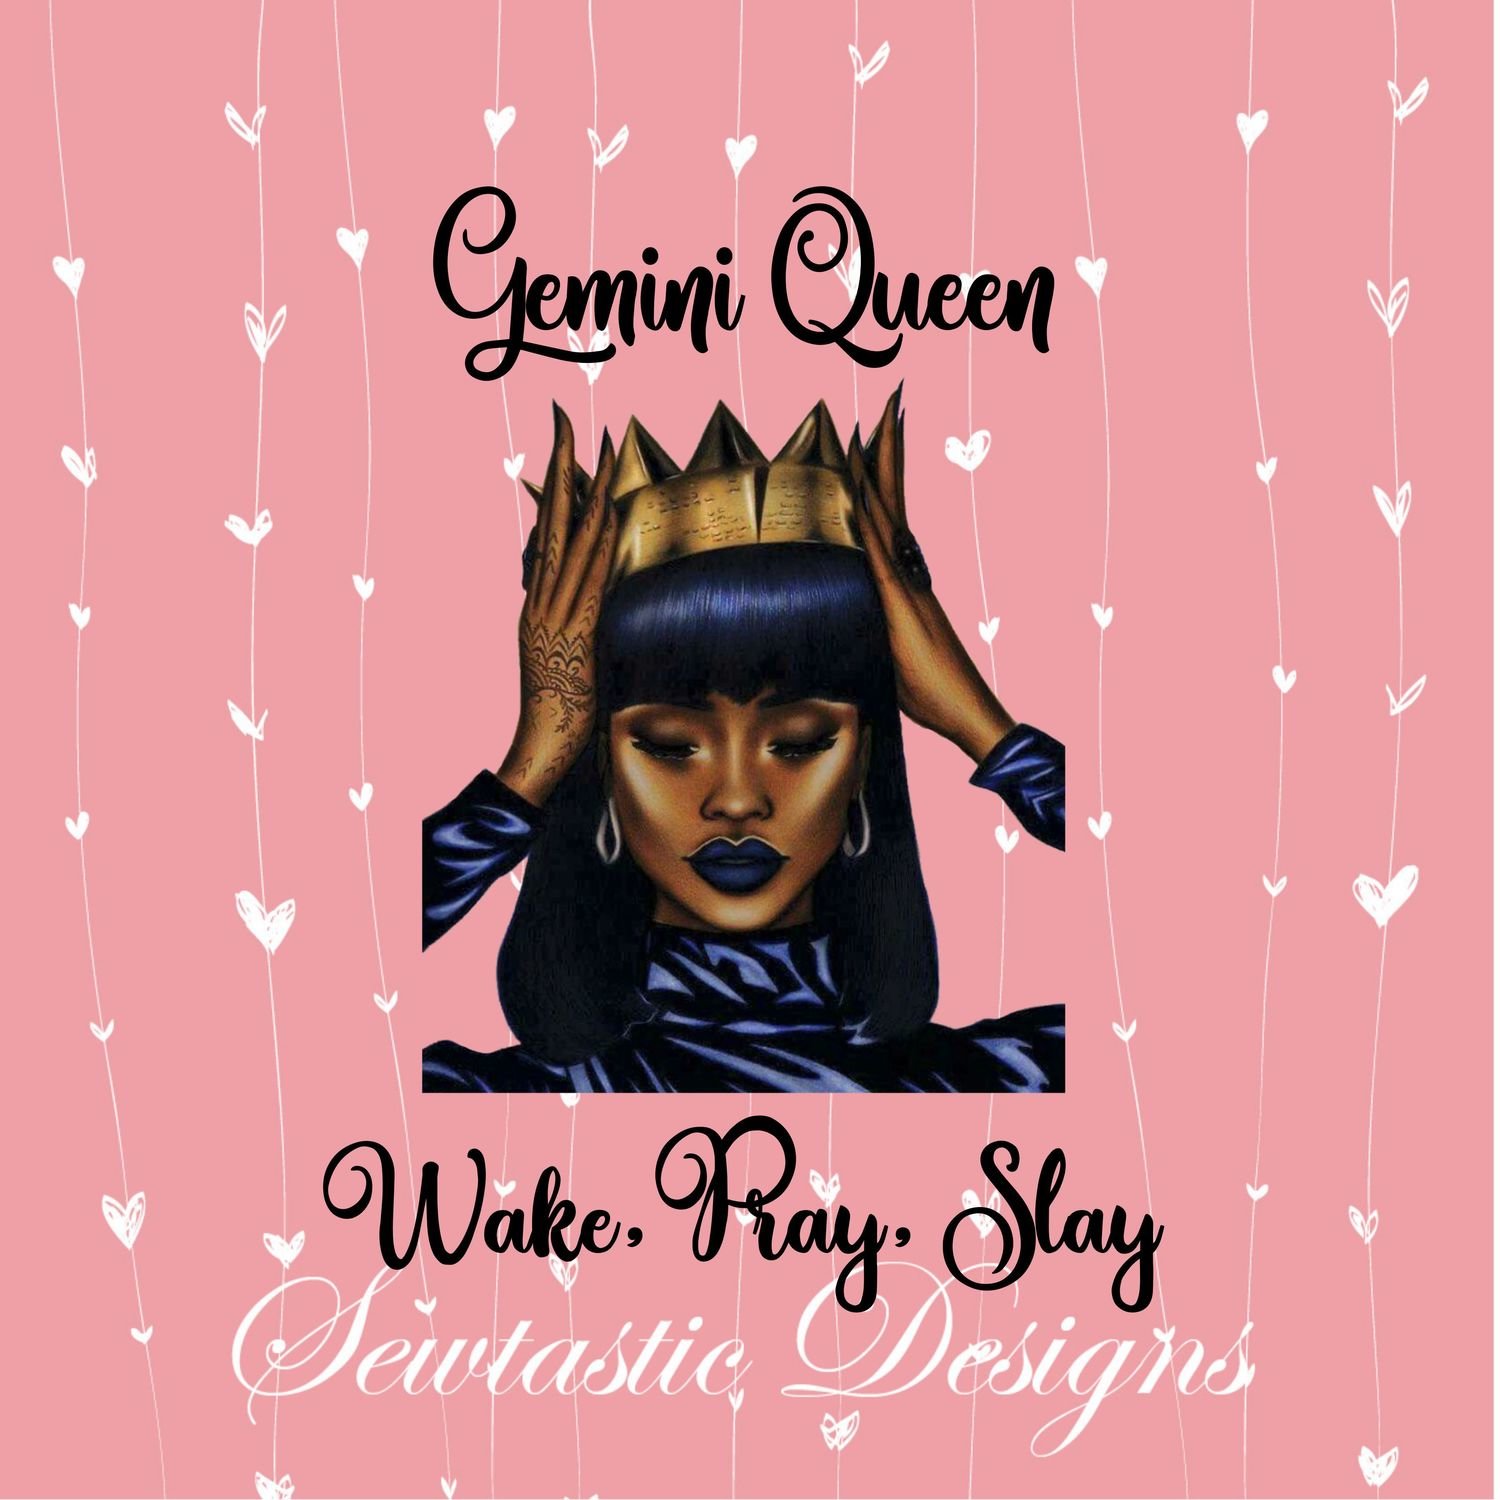 Download Gemini Queen Printable & SVG Cut File, Iron On, Decal, Cricut, Silhouette, ScanNCut & Many More